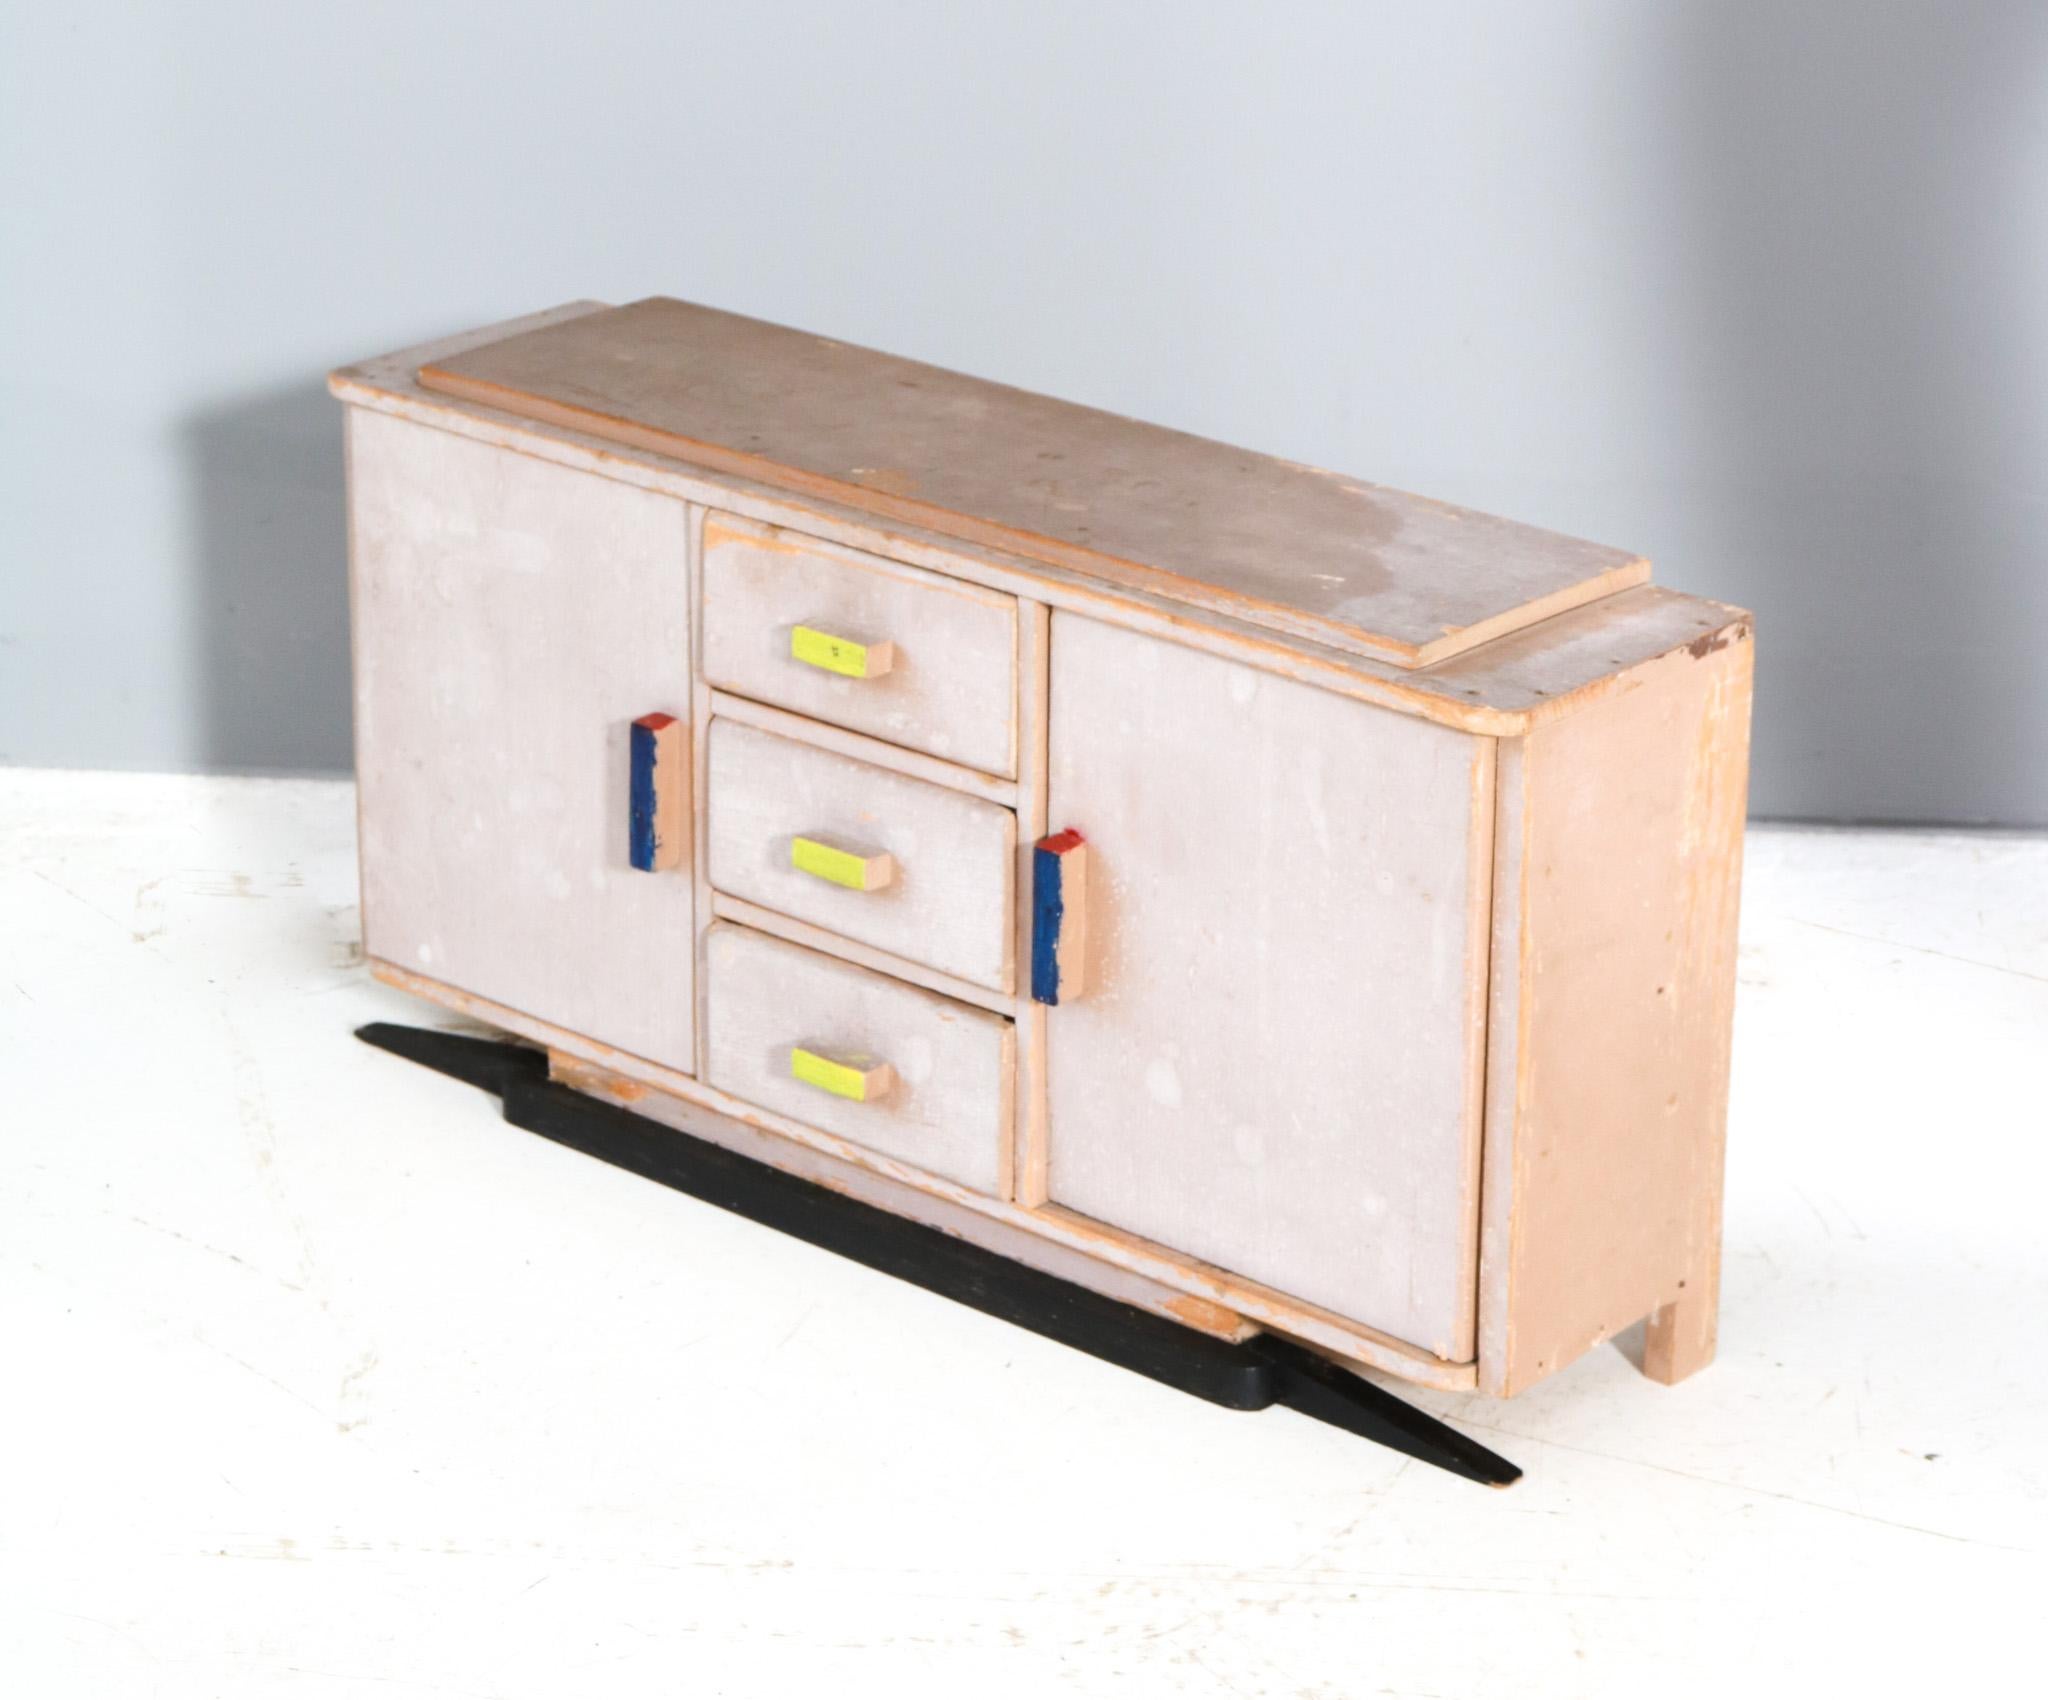 Mid-20th Century Lacquered Plywood Art Deco Modernist Children's Furniture Credenza, 1930s For Sale